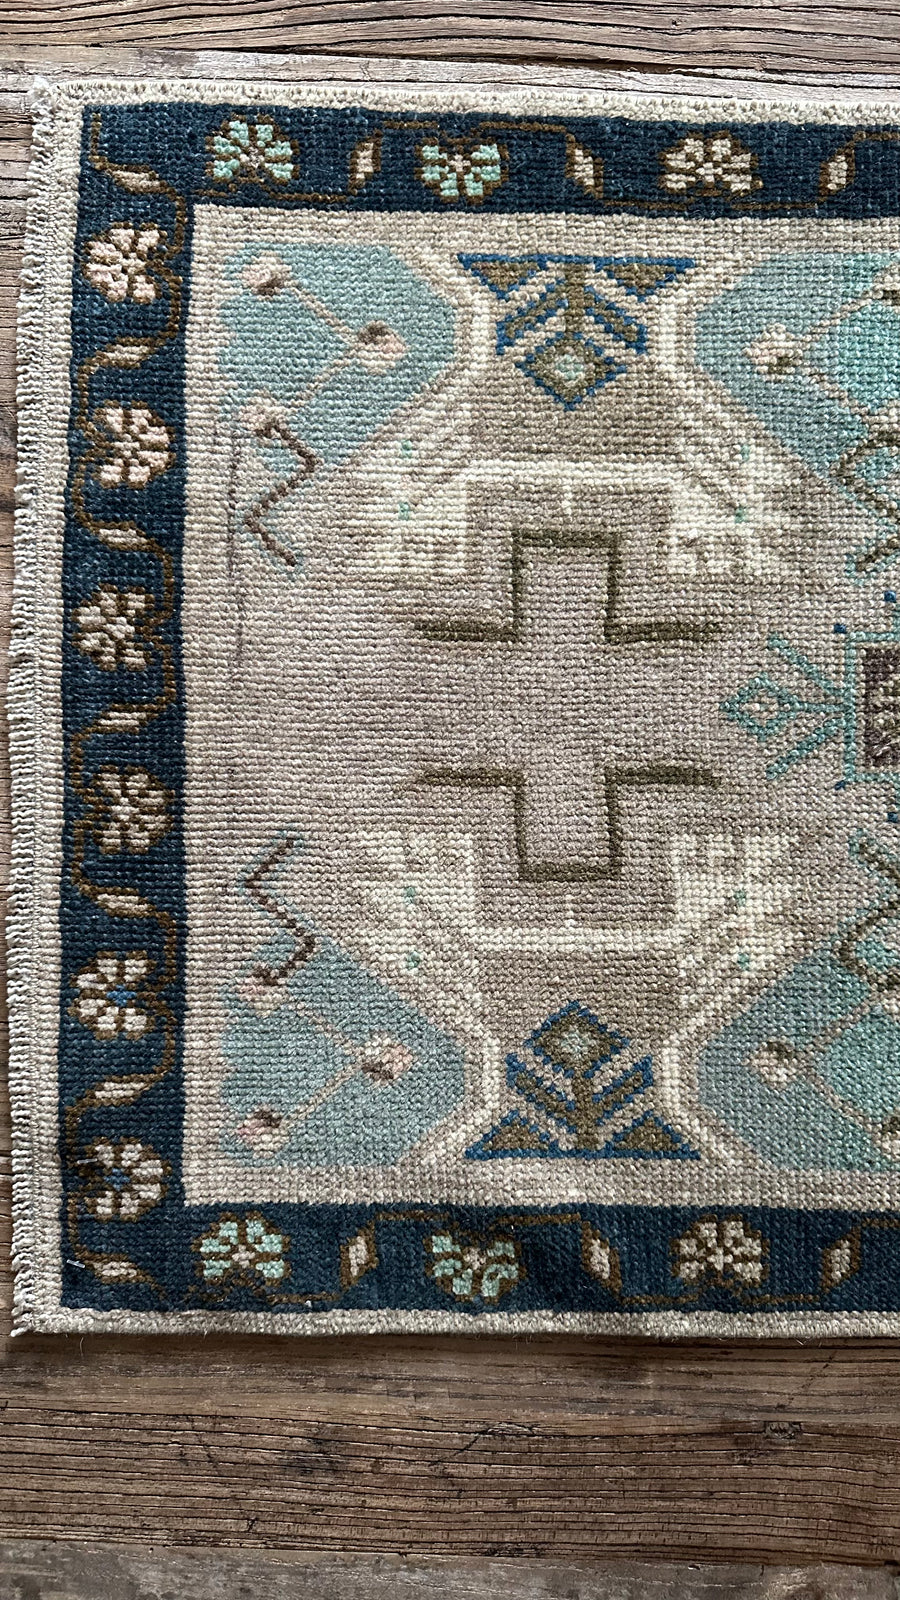 1’9 x 3’7 Antique Turkish Rug Muted Sea Foam, Deep Teal, Gray and Brown